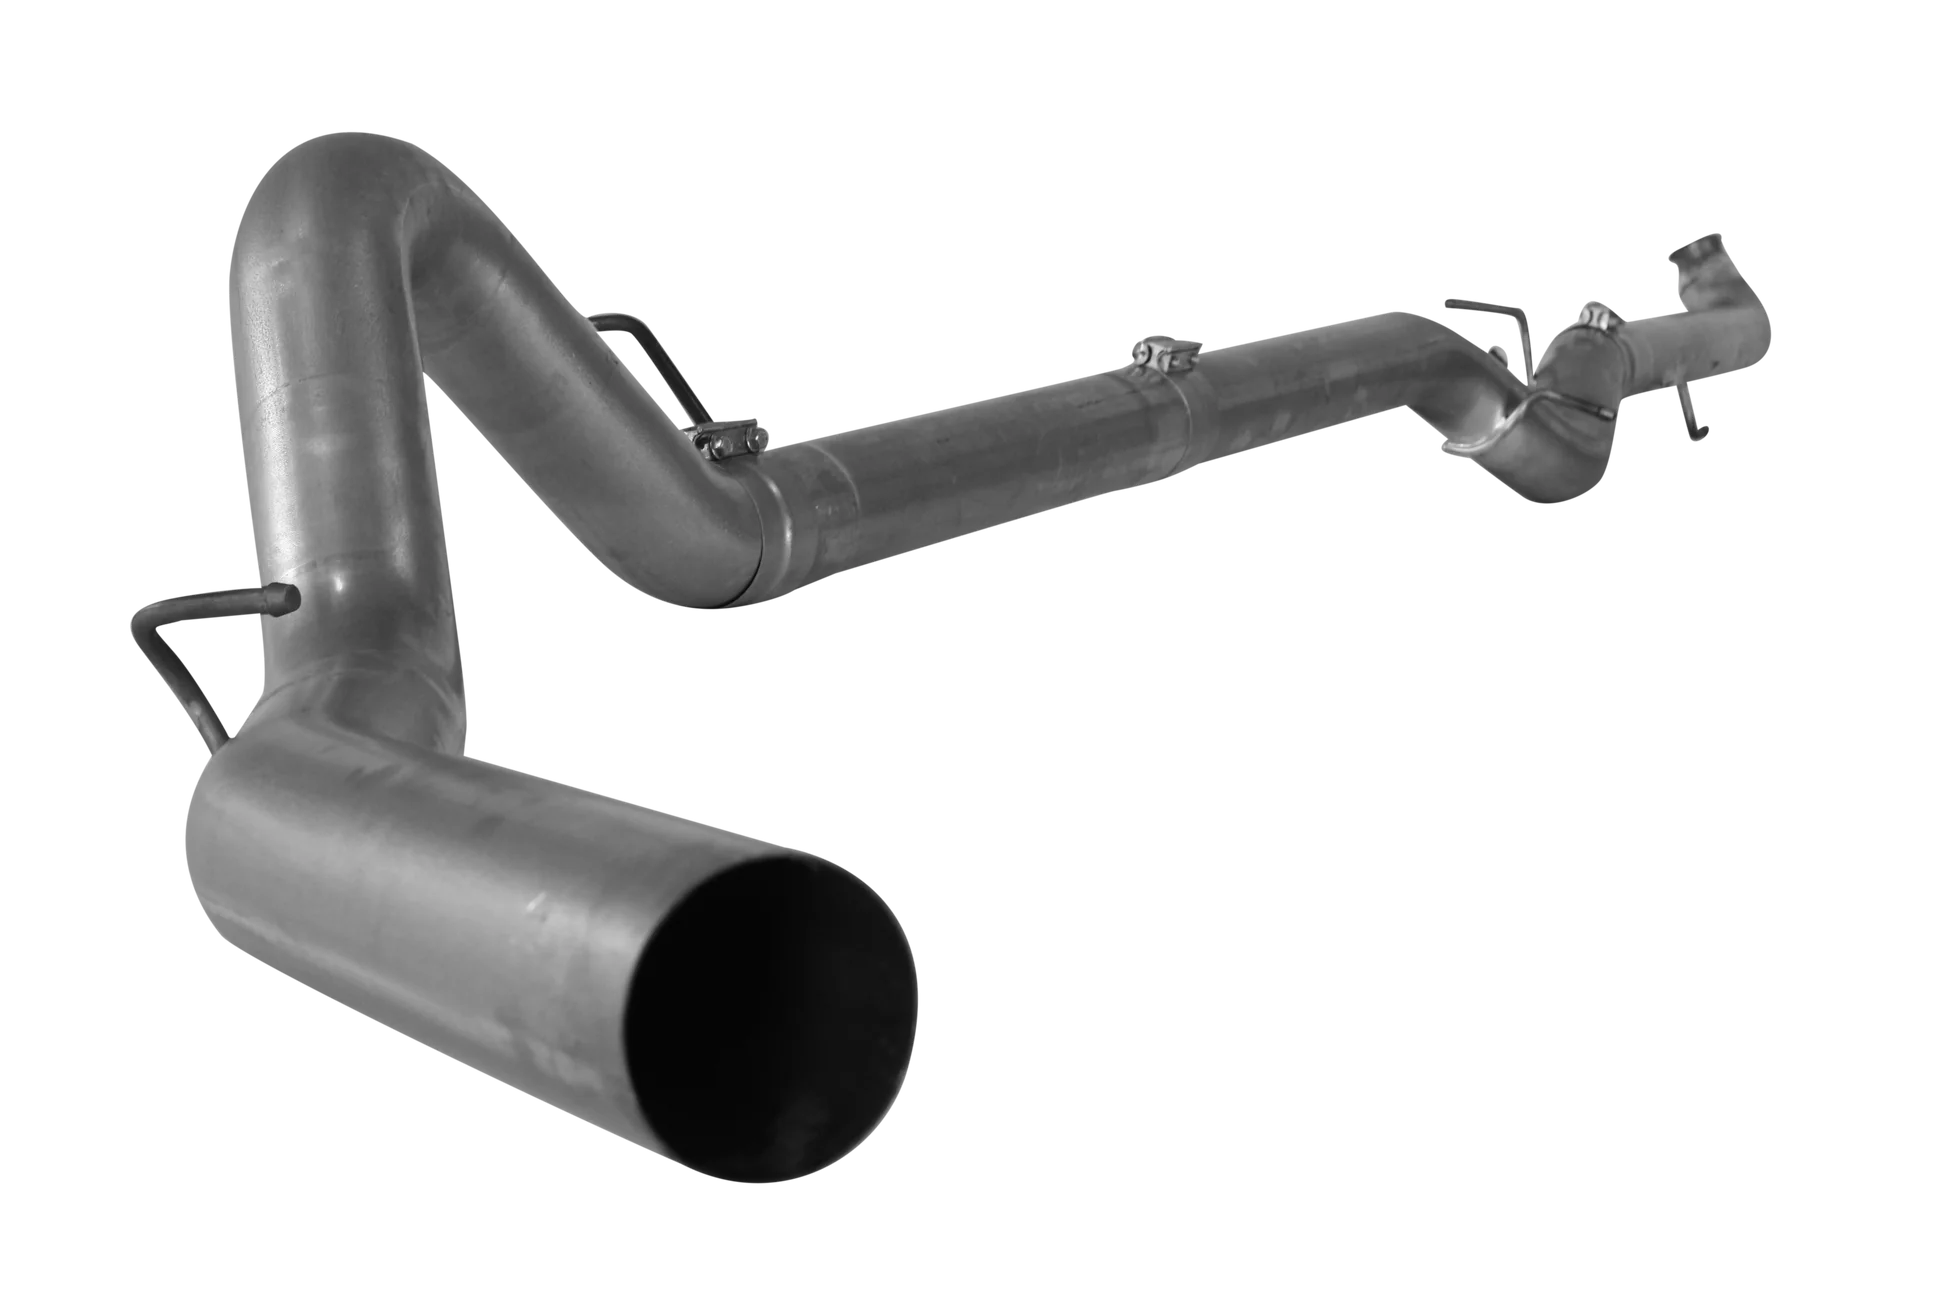 531100 531111 532100 532111 Mel's Manufacturing 5" Downpipe Back Single | 2001-2007 GM 2500/3500 6.6L DURAMAX Mels Mfg FloPro Flo-Pro Flo Pro Hell On Wheels Performance Ltd Limited Canadian Owned and Operated Online Diesel Parts Distribution & Wholesale Supply Center in Alberta Canada Shipping Supplying to Alberta British Columbia Sask Saskatchewan Manitoba Ontario Quebec Newfoundland Labrador New Brunswick Nova Scotia Prince Edward Island AB BC SK MB ON QC PQ NS NB NFLD N.L. PEI